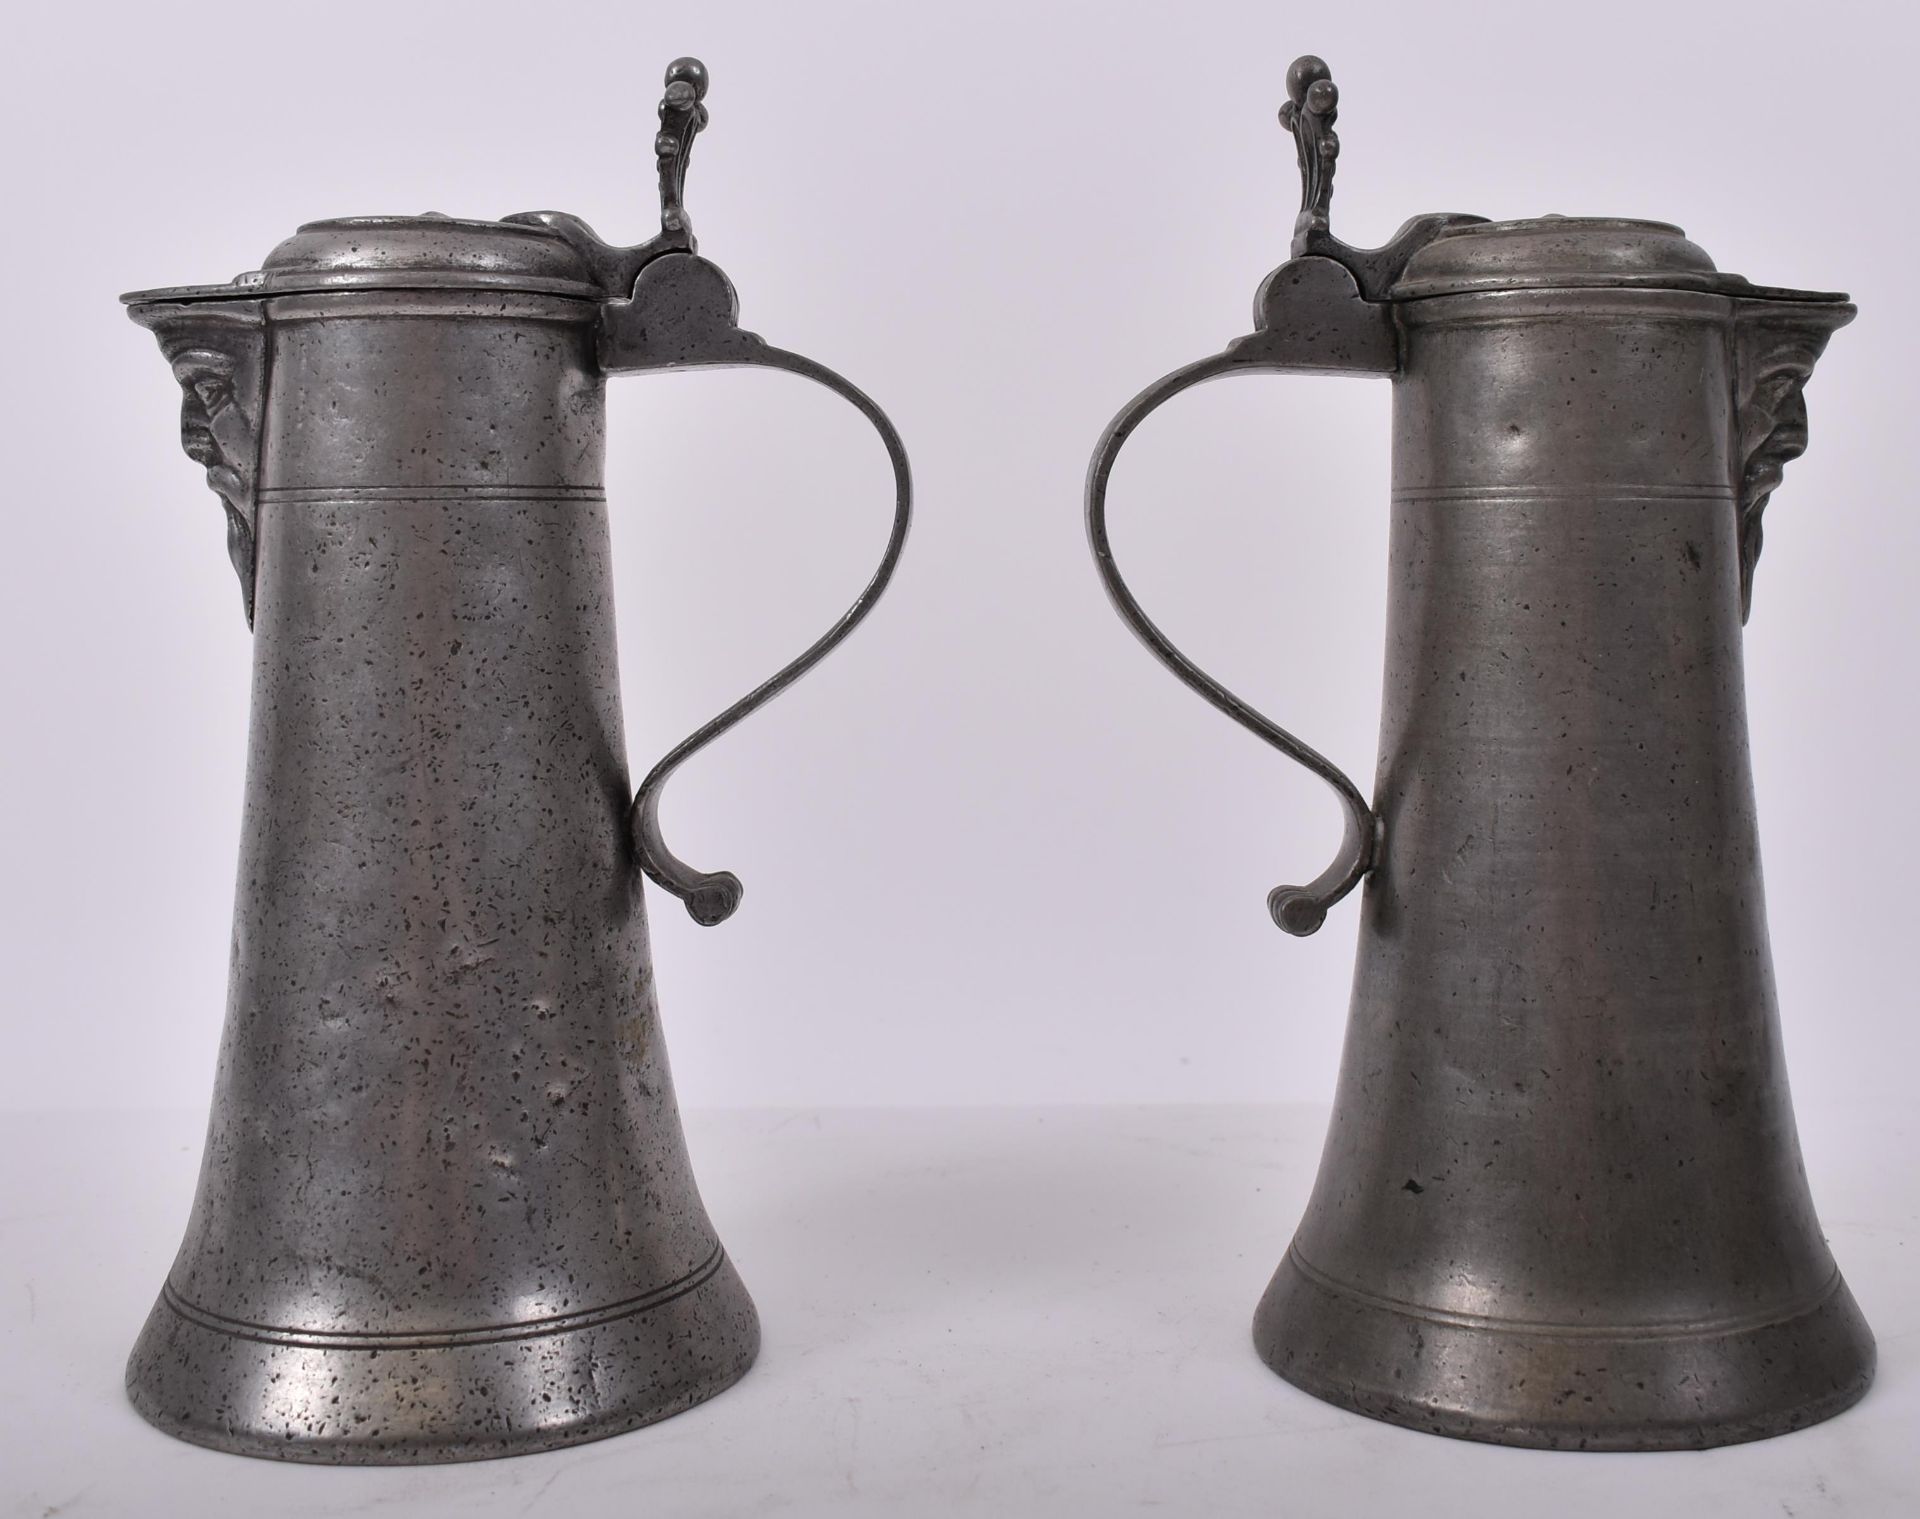 PAIR OF EARLY 18TH CENTURY 1730 SWISS BEARDED MAN FLAGONS - Image 3 of 7